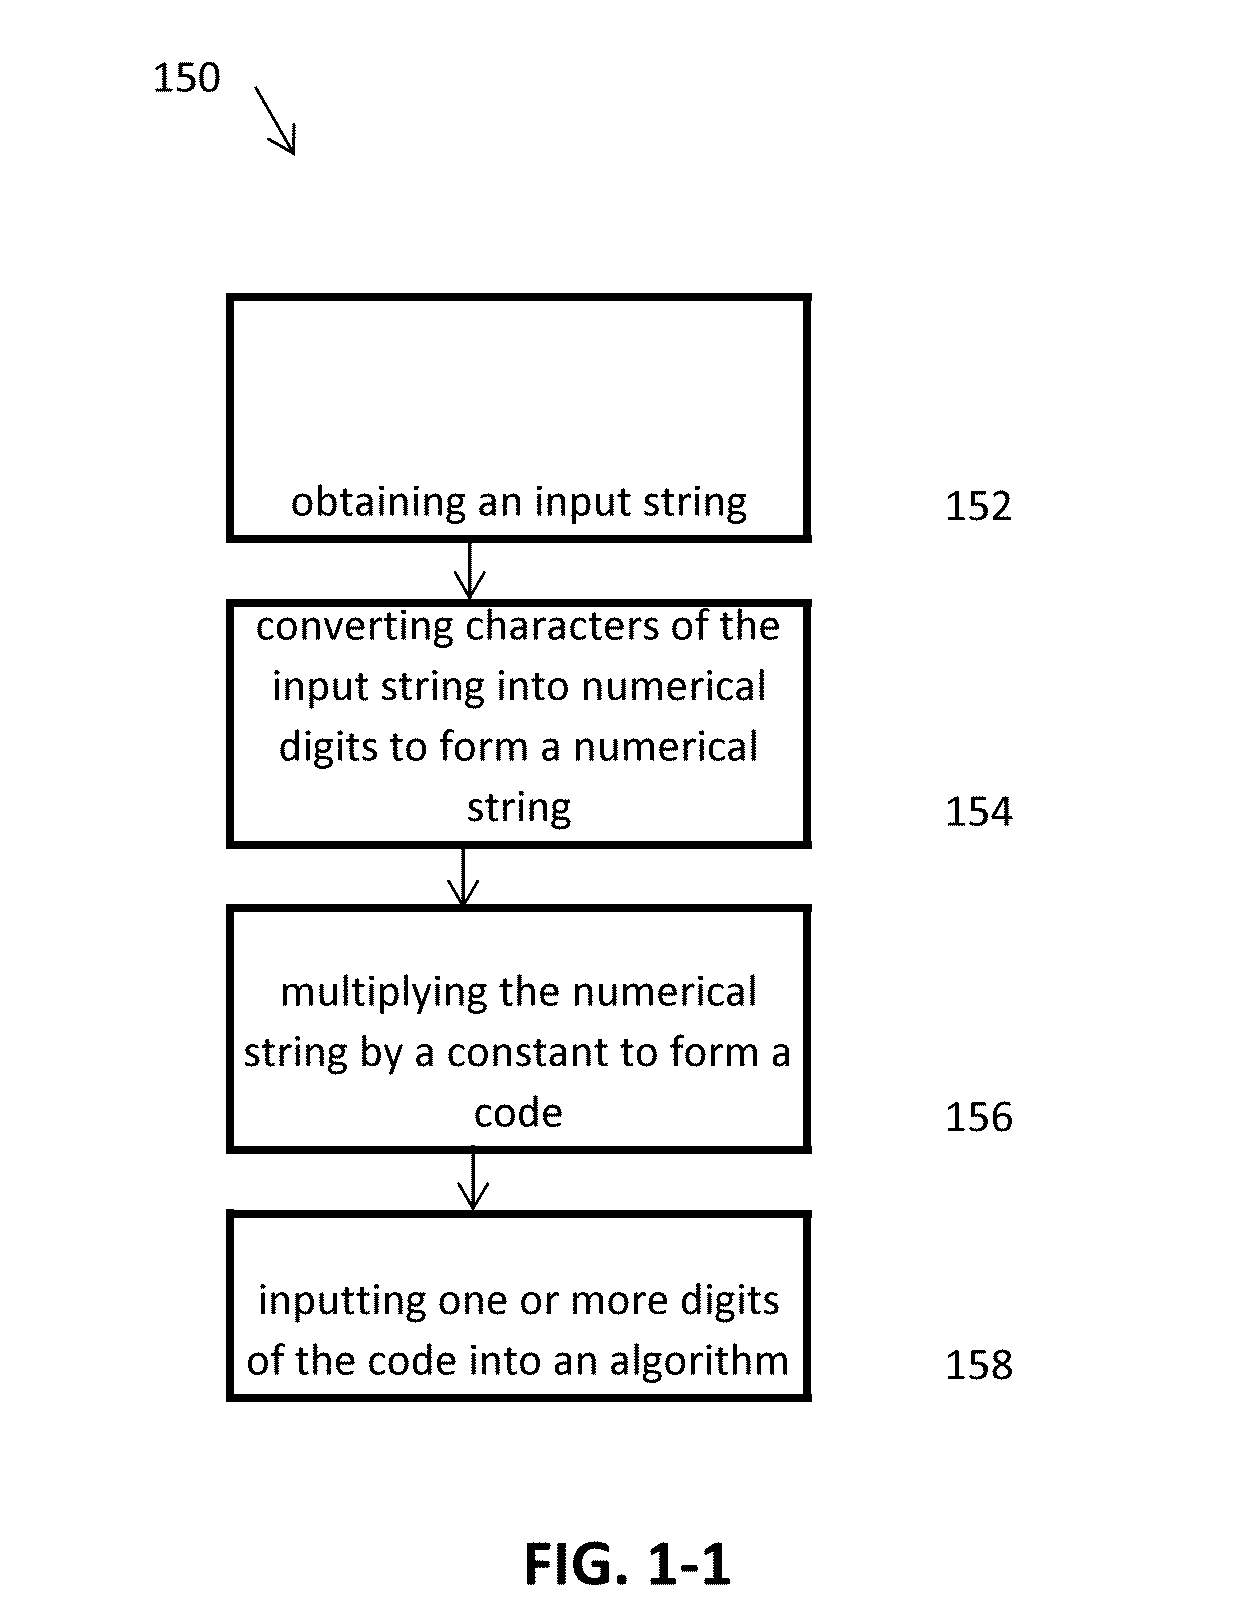 Methods, systems, and computer readable media for securely collecting, safeguarding, and disseminating electronically stored information